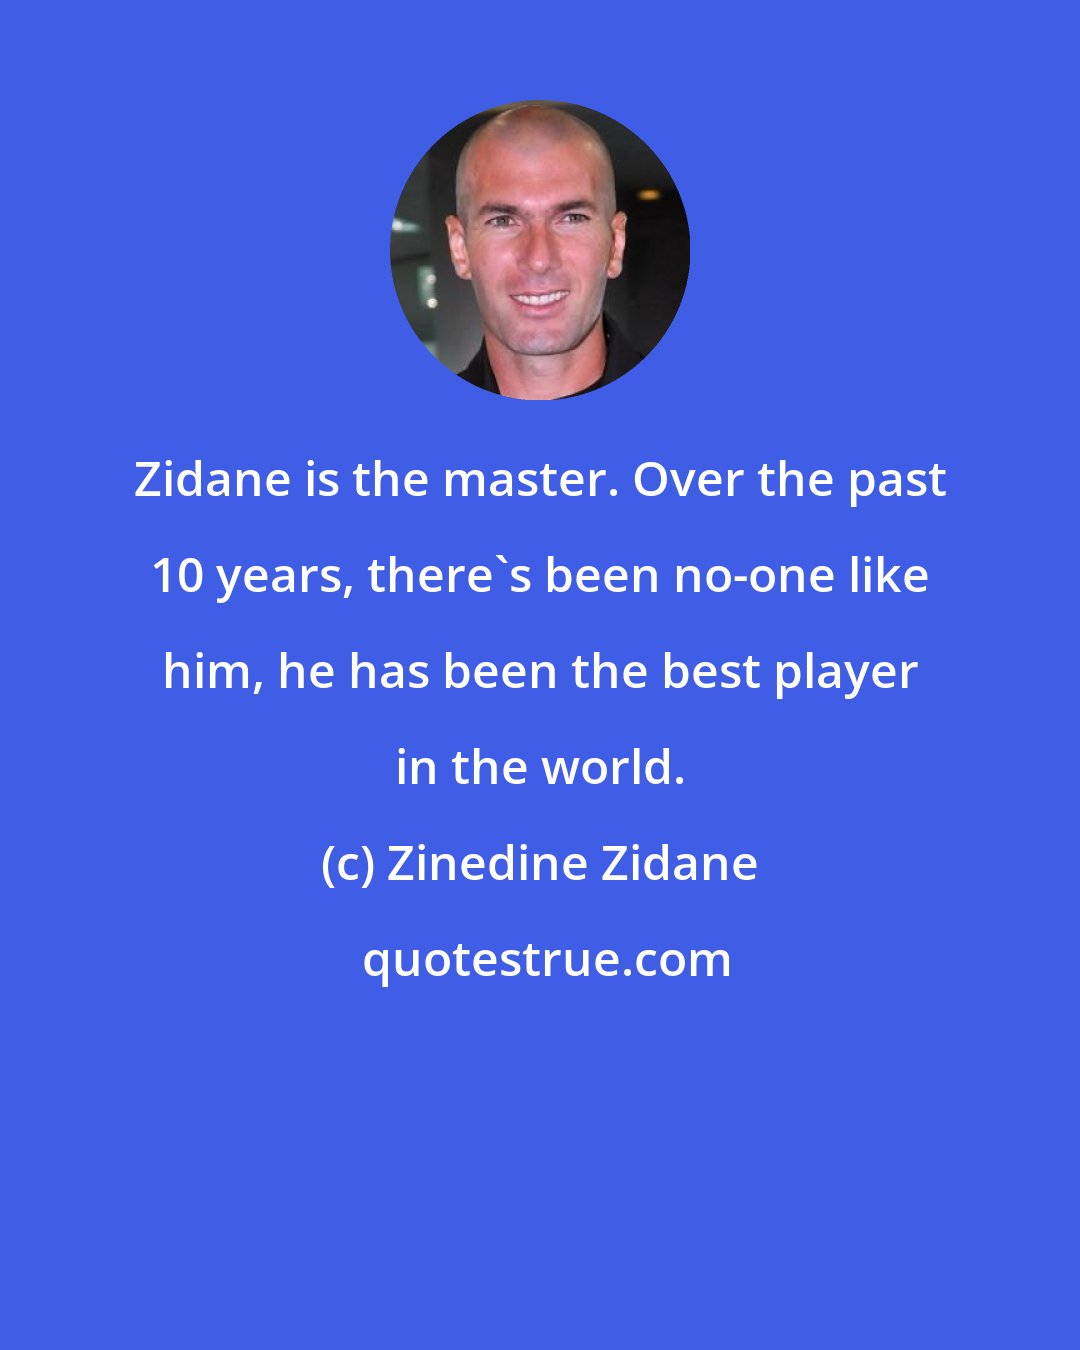 Zinedine Zidane: Zidane is the master. Over the past 10 years, there's been no-one like him, he has been the best player in the world.